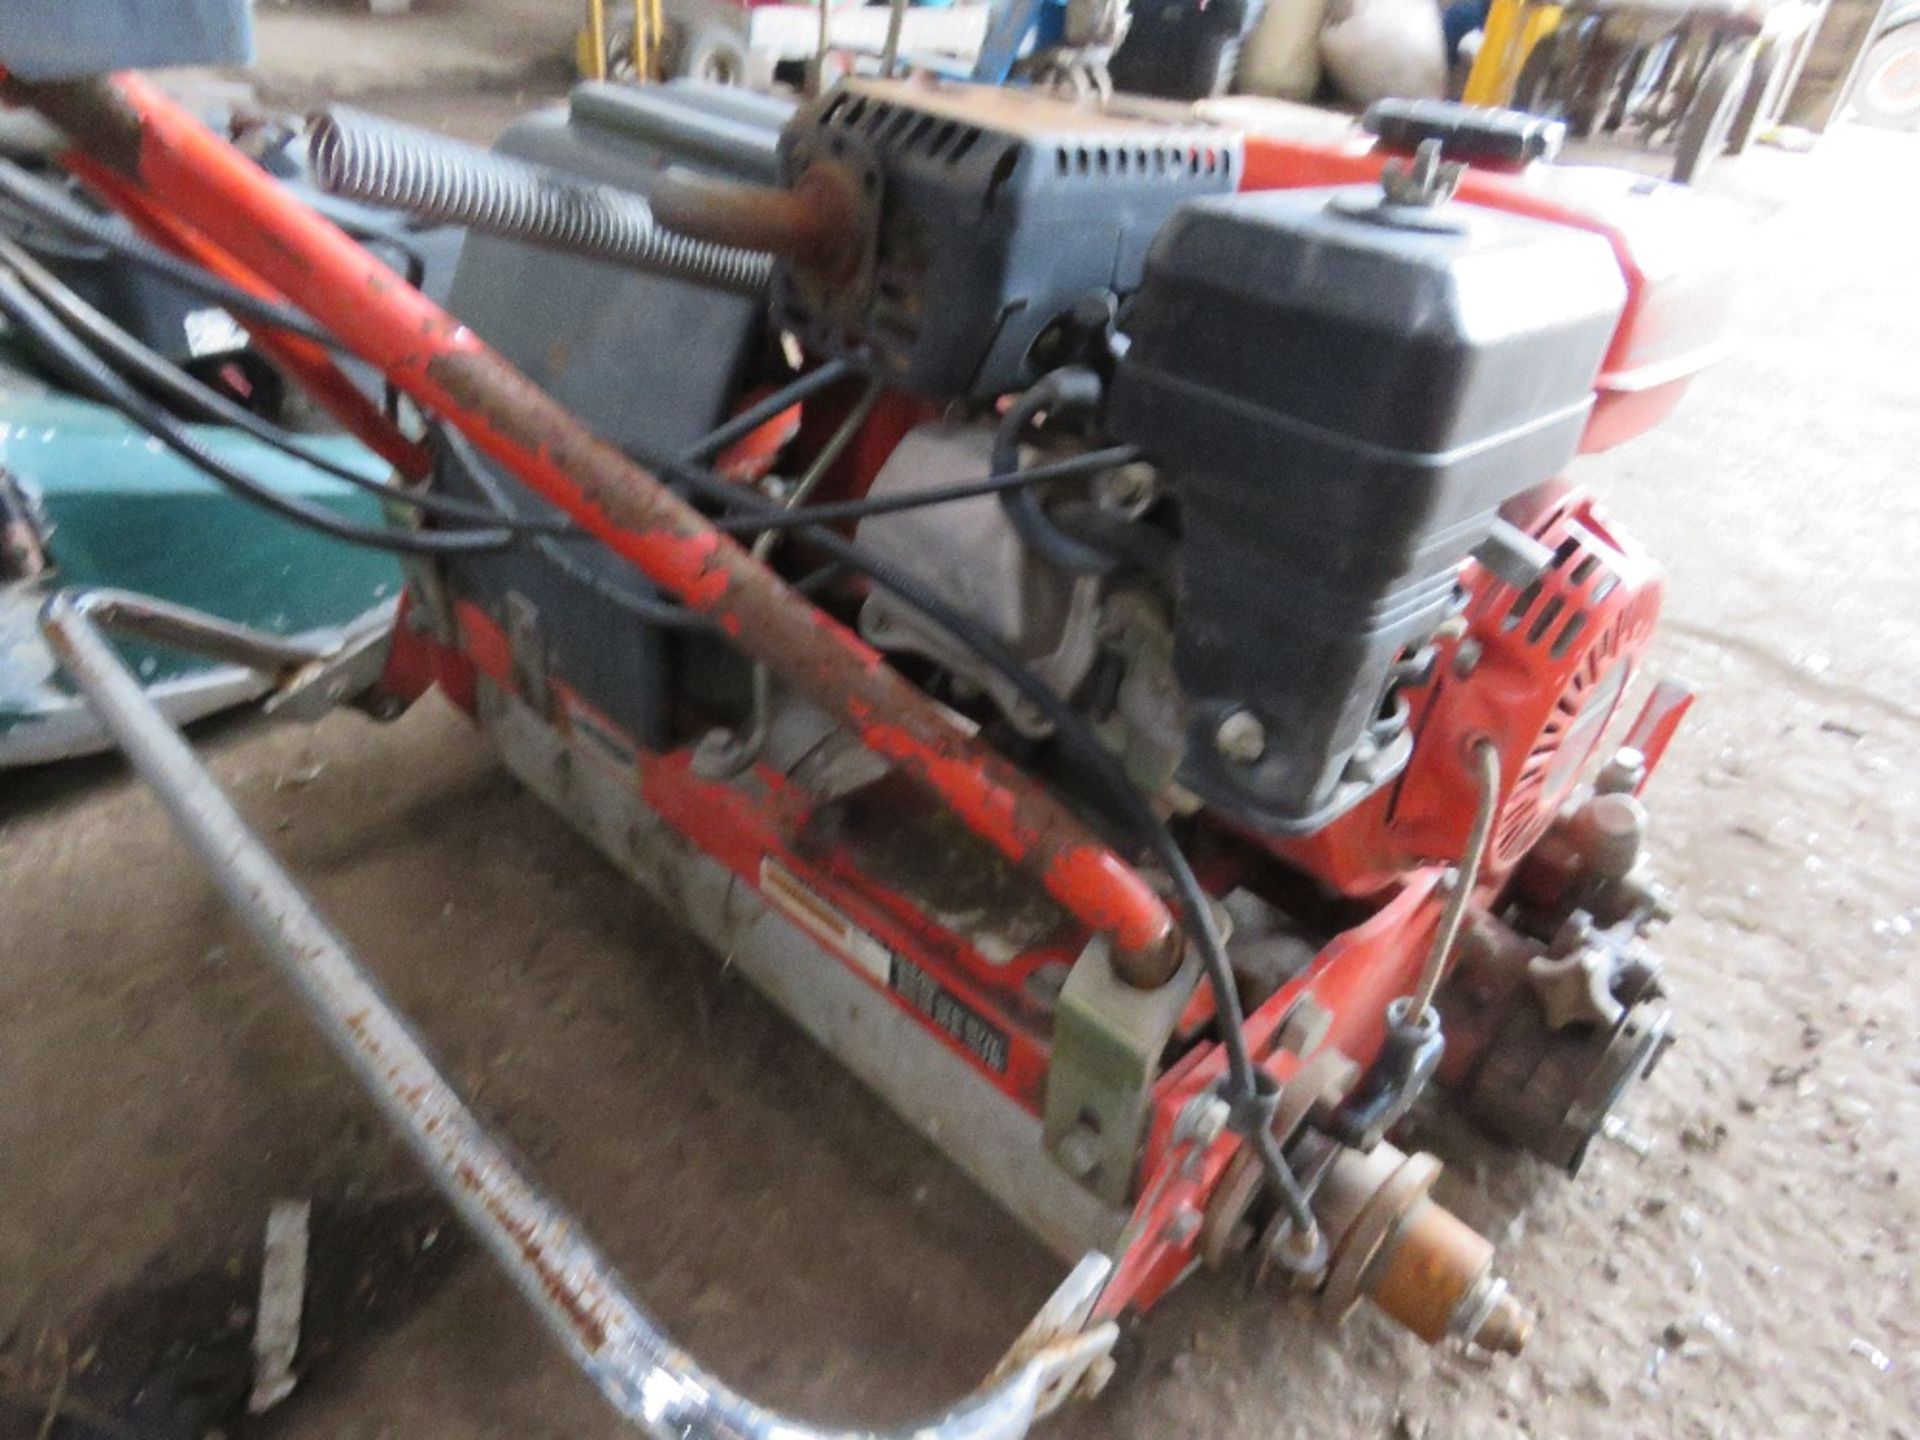 JACOBSEN PETROL ENGINED GREEN KING 522 CYLINDER LAWN MOWERN HONDA ENGINE, NO BOX. THIS LOT IS SOL - Image 4 of 4